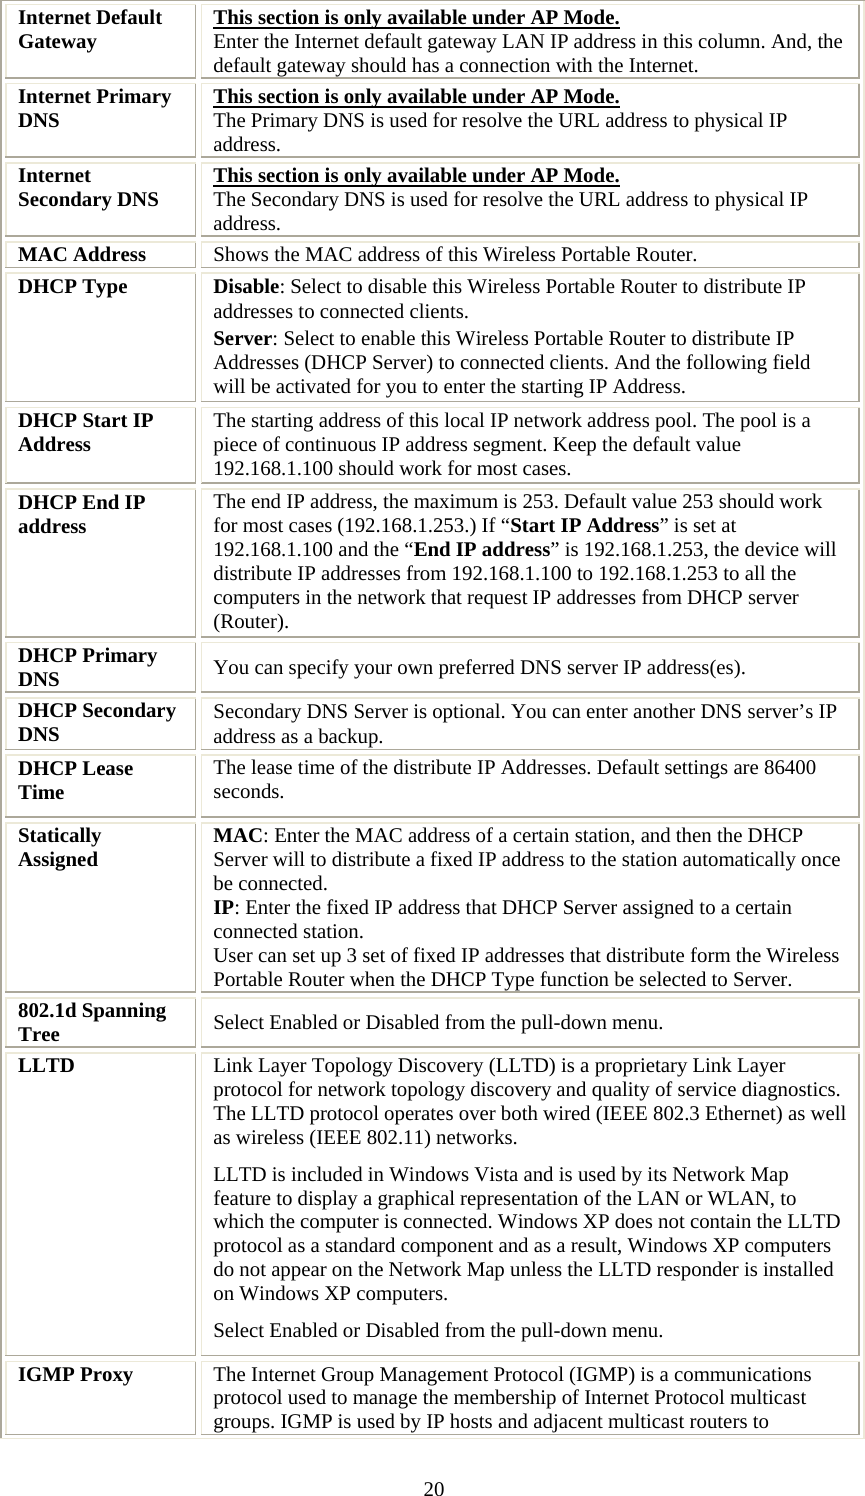   20Internet Default Gateway  This section is only available under AP Mode. Enter the Internet default gateway LAN IP address in this column. And, the default gateway should has a connection with the Internet. Internet Primary DNS  This section is only available under AP Mode. The Primary DNS is used for resolve the URL address to physical IP address.  Internet Secondary DNS  This section is only available under AP Mode. The Secondary DNS is used for resolve the URL address to physical IP address. MAC Address  Shows the MAC address of this Wireless Portable Router. DHCP Type  Disable: Select to disable this Wireless Portable Router to distribute IP addresses to connected clients. Server: Select to enable this Wireless Portable Router to distribute IP Addresses (DHCP Server) to connected clients. And the following field will be activated for you to enter the starting IP Address. DHCP Start IP Address  The starting address of this local IP network address pool. The pool is a piece of continuous IP address segment. Keep the default value 192.168.1.100 should work for most cases. DHCP End IP address  The end IP address, the maximum is 253. Default value 253 should work for most cases (192.168.1.253.) If “Start IP Address” is set at 192.168.1.100 and the “End IP address” is 192.168.1.253, the device will distribute IP addresses from 192.168.1.100 to 192.168.1.253 to all the computers in the network that request IP addresses from DHCP server (Router). DHCP Primary DNS  You can specify your own preferred DNS server IP address(es).  DHCP Secondary DNS  Secondary DNS Server is optional. You can enter another DNS server’s IP address as a backup. DHCP Lease Time  The lease time of the distribute IP Addresses. Default settings are 86400 seconds. Statically Assigned  MAC: Enter the MAC address of a certain station, and then the DHCP Server will to distribute a fixed IP address to the station automatically once be connected. IP: Enter the fixed IP address that DHCP Server assigned to a certain connected station.  User can set up 3 set of fixed IP addresses that distribute form the Wireless Portable Router when the DHCP Type function be selected to Server. 802.1d Spanning Tree  Select Enabled or Disabled from the pull-down menu. LLTD  Link Layer Topology Discovery (LLTD) is a proprietary Link Layer protocol for network topology discovery and quality of service diagnostics. The LLTD protocol operates over both wired (IEEE 802.3 Ethernet) as well as wireless (IEEE 802.11) networks. LLTD is included in Windows Vista and is used by its Network Map feature to display a graphical representation of the LAN or WLAN, to which the computer is connected. Windows XP does not contain the LLTD protocol as a standard component and as a result, Windows XP computers do not appear on the Network Map unless the LLTD responder is installed on Windows XP computers. Select Enabled or Disabled from the pull-down menu. IGMP Proxy  The Internet Group Management Protocol (IGMP) is a communications protocol used to manage the membership of Internet Protocol multicast groups. IGMP is used by IP hosts and adjacent multicast routers to 